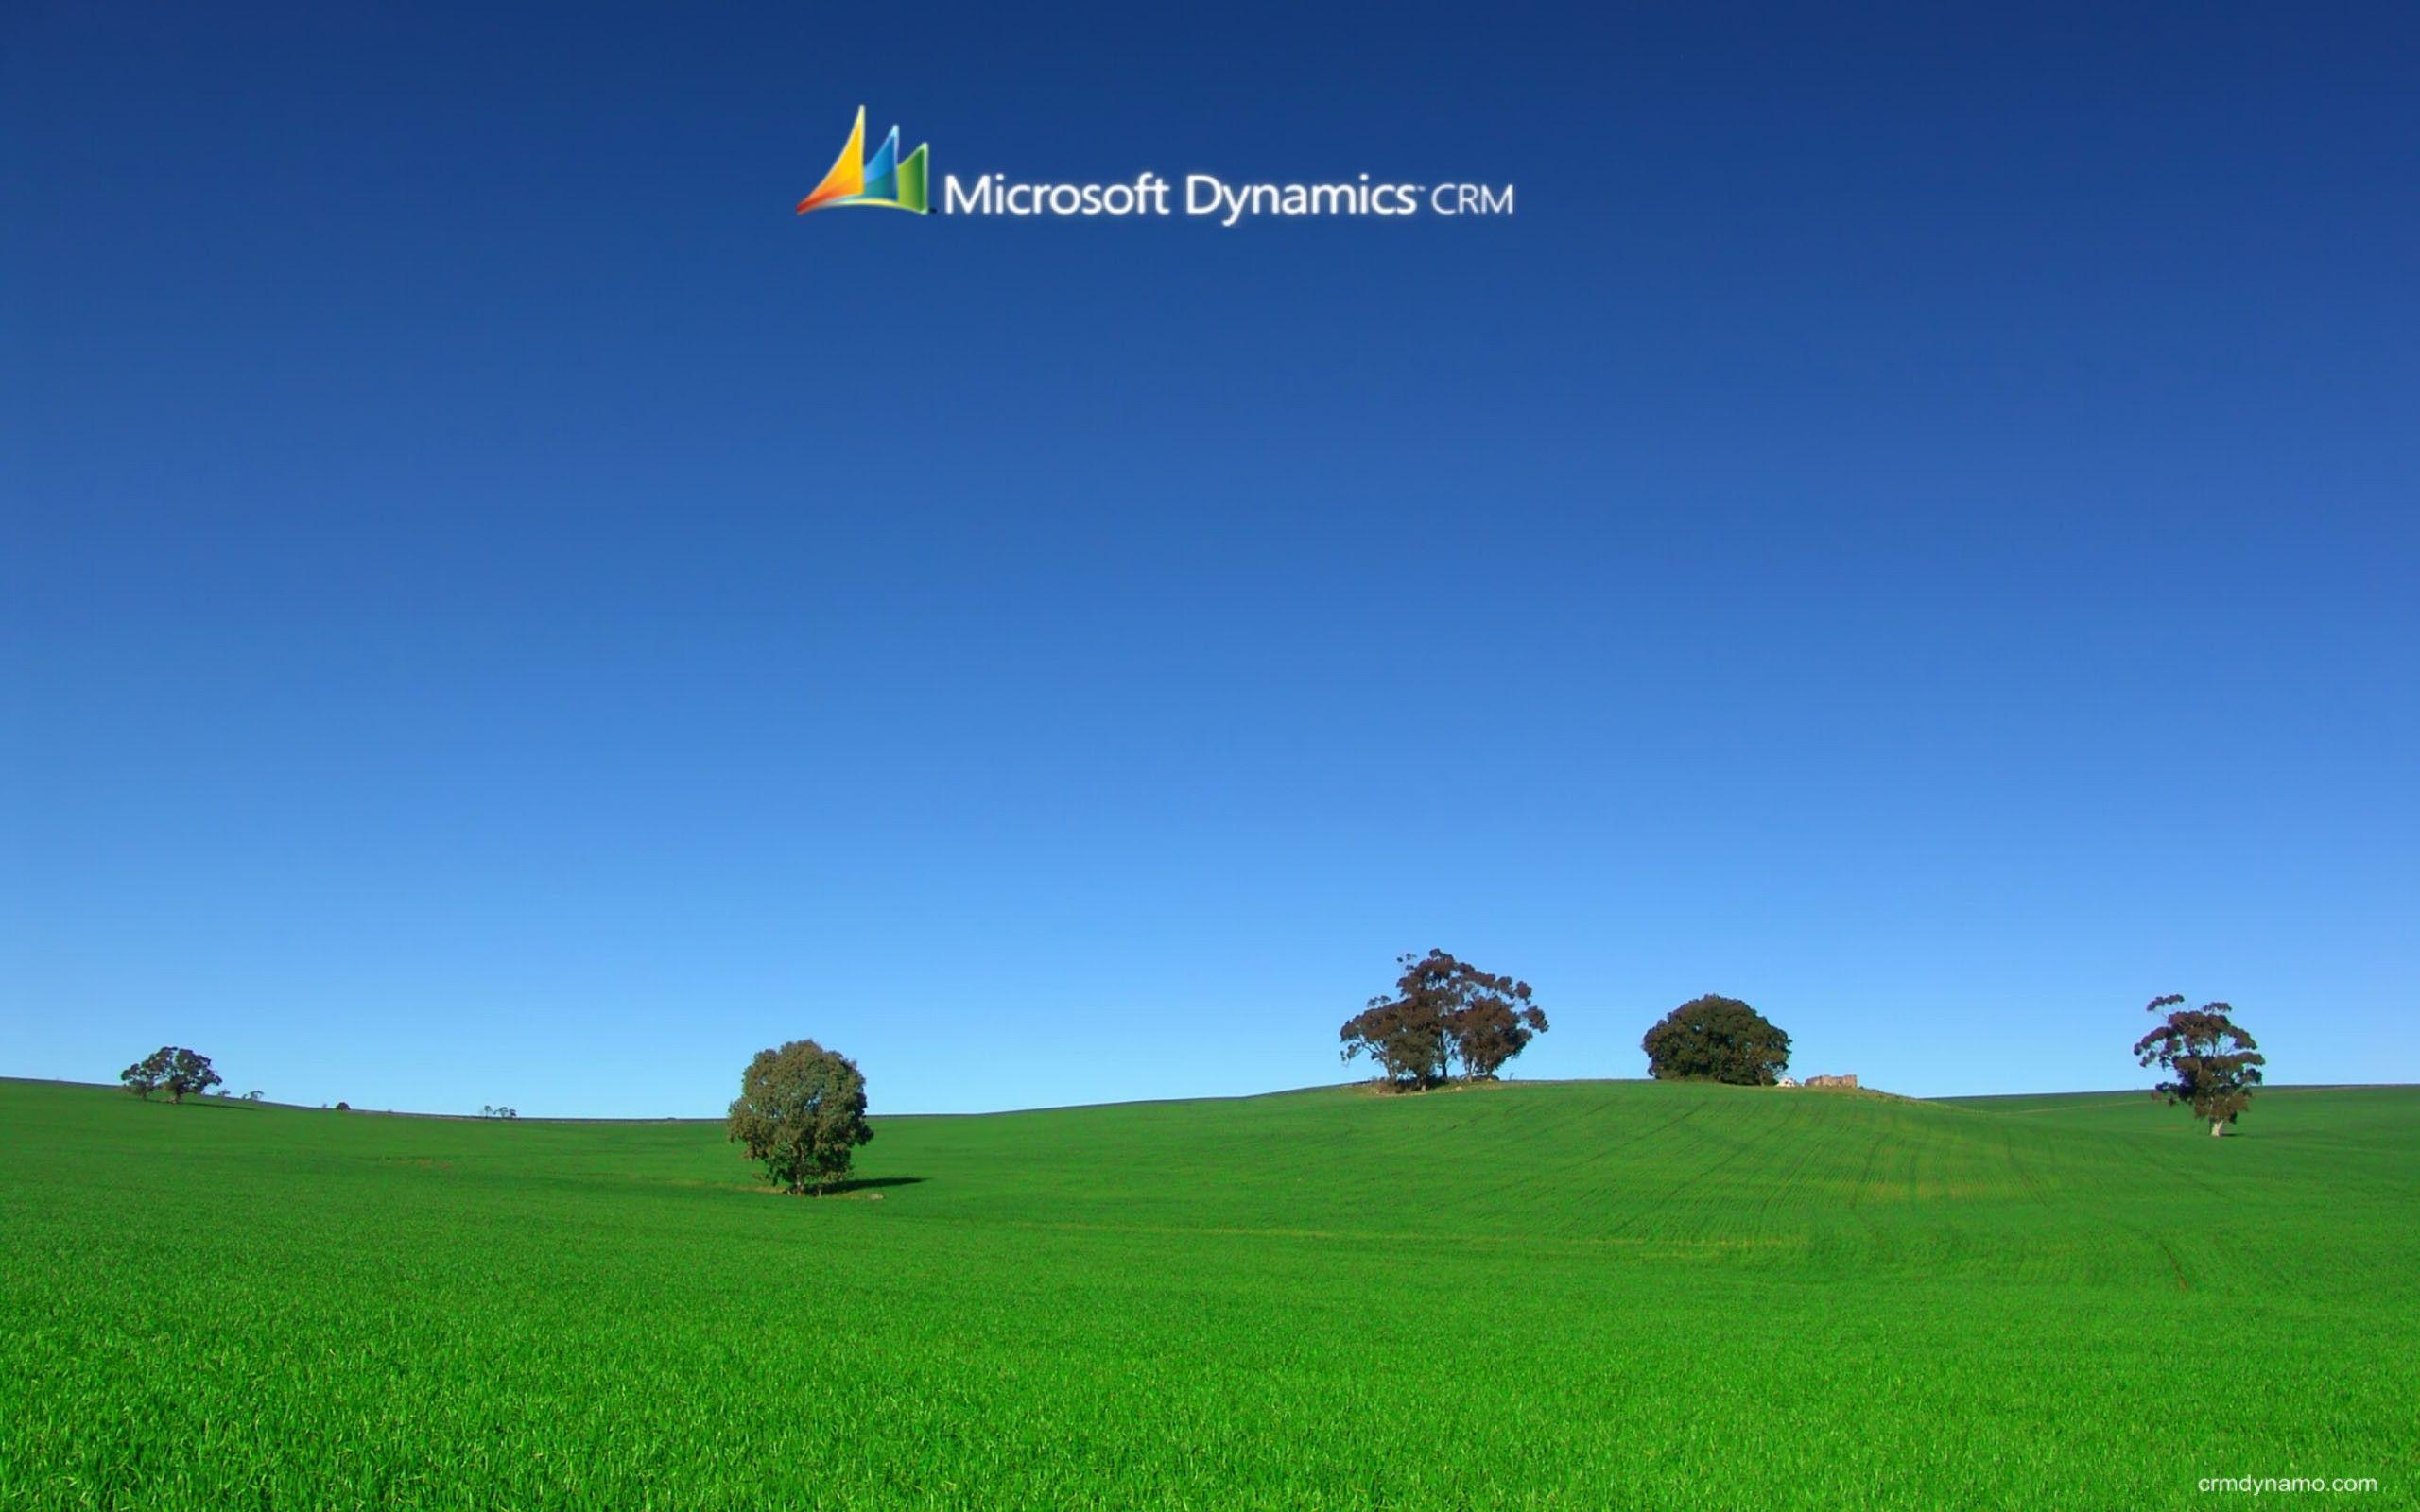 Download these new Dynamics CRM wallpaper to spice up your